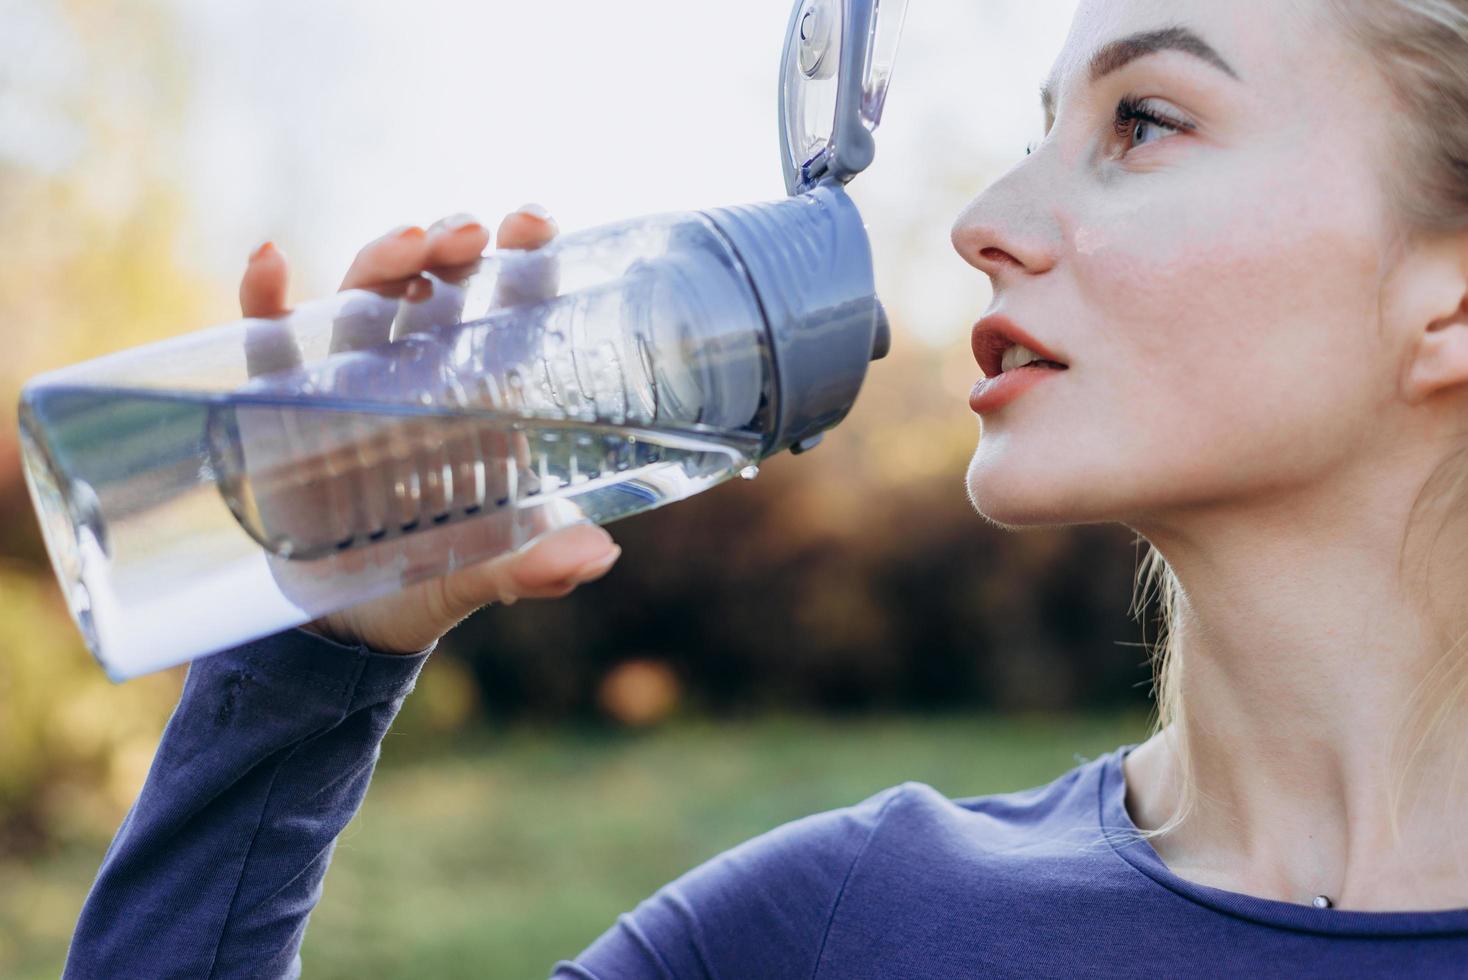 Fitness in the park, girl drinks water from a bottle, close up. photo